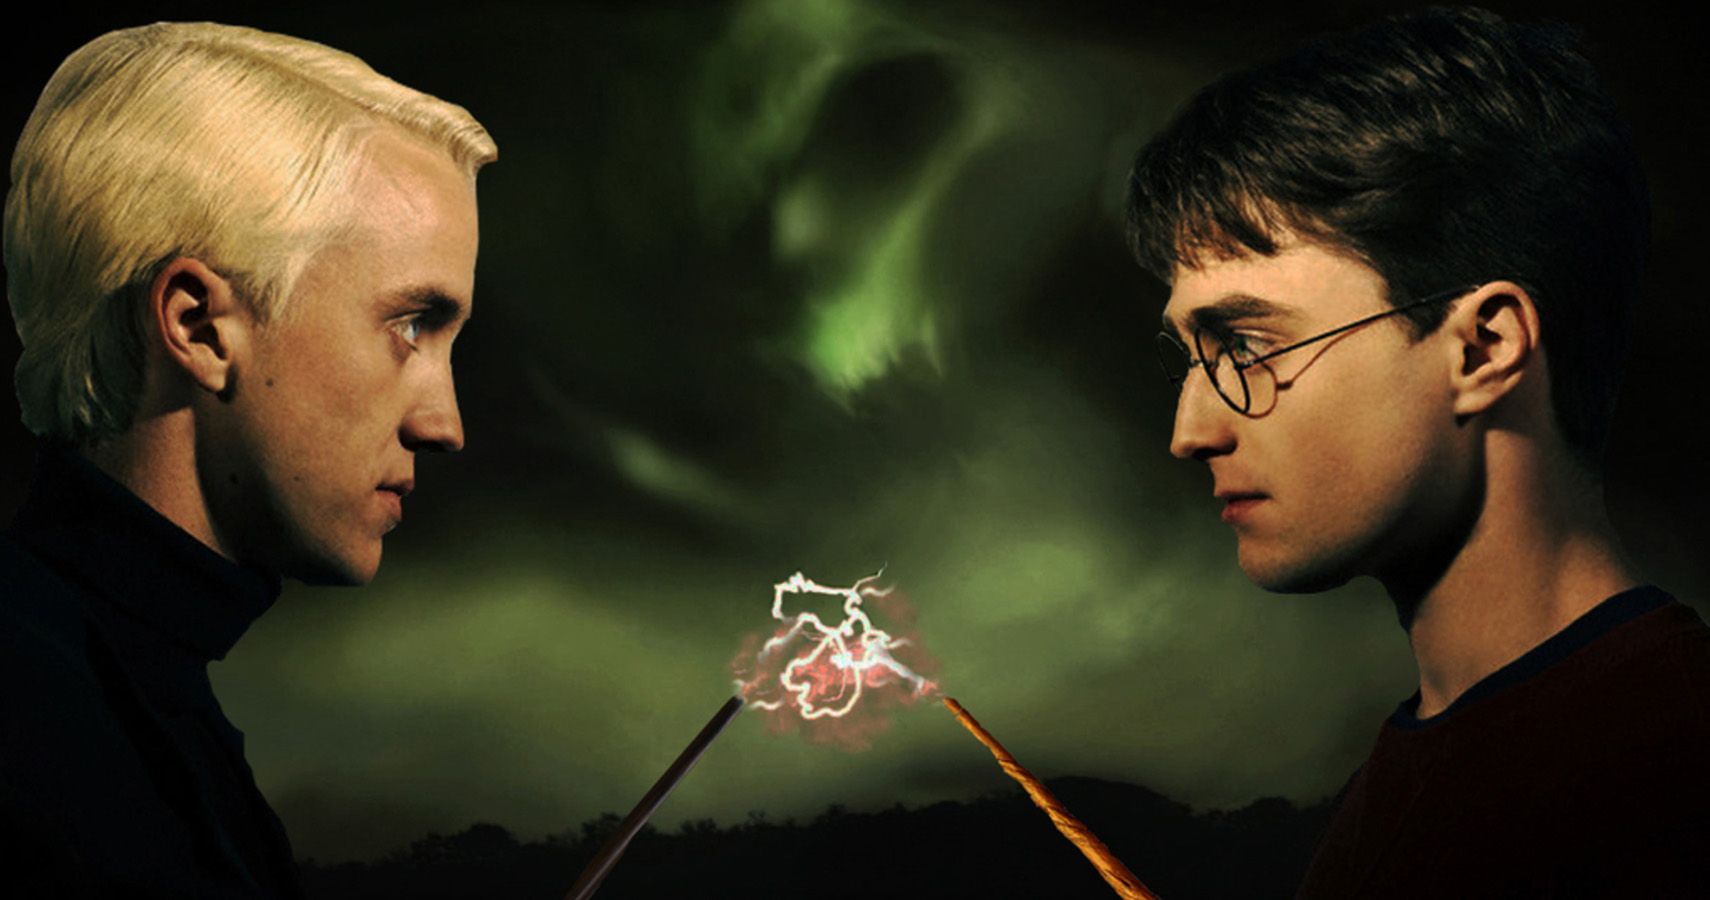 What are some memorable rivalries between Harry Potter characters? 2